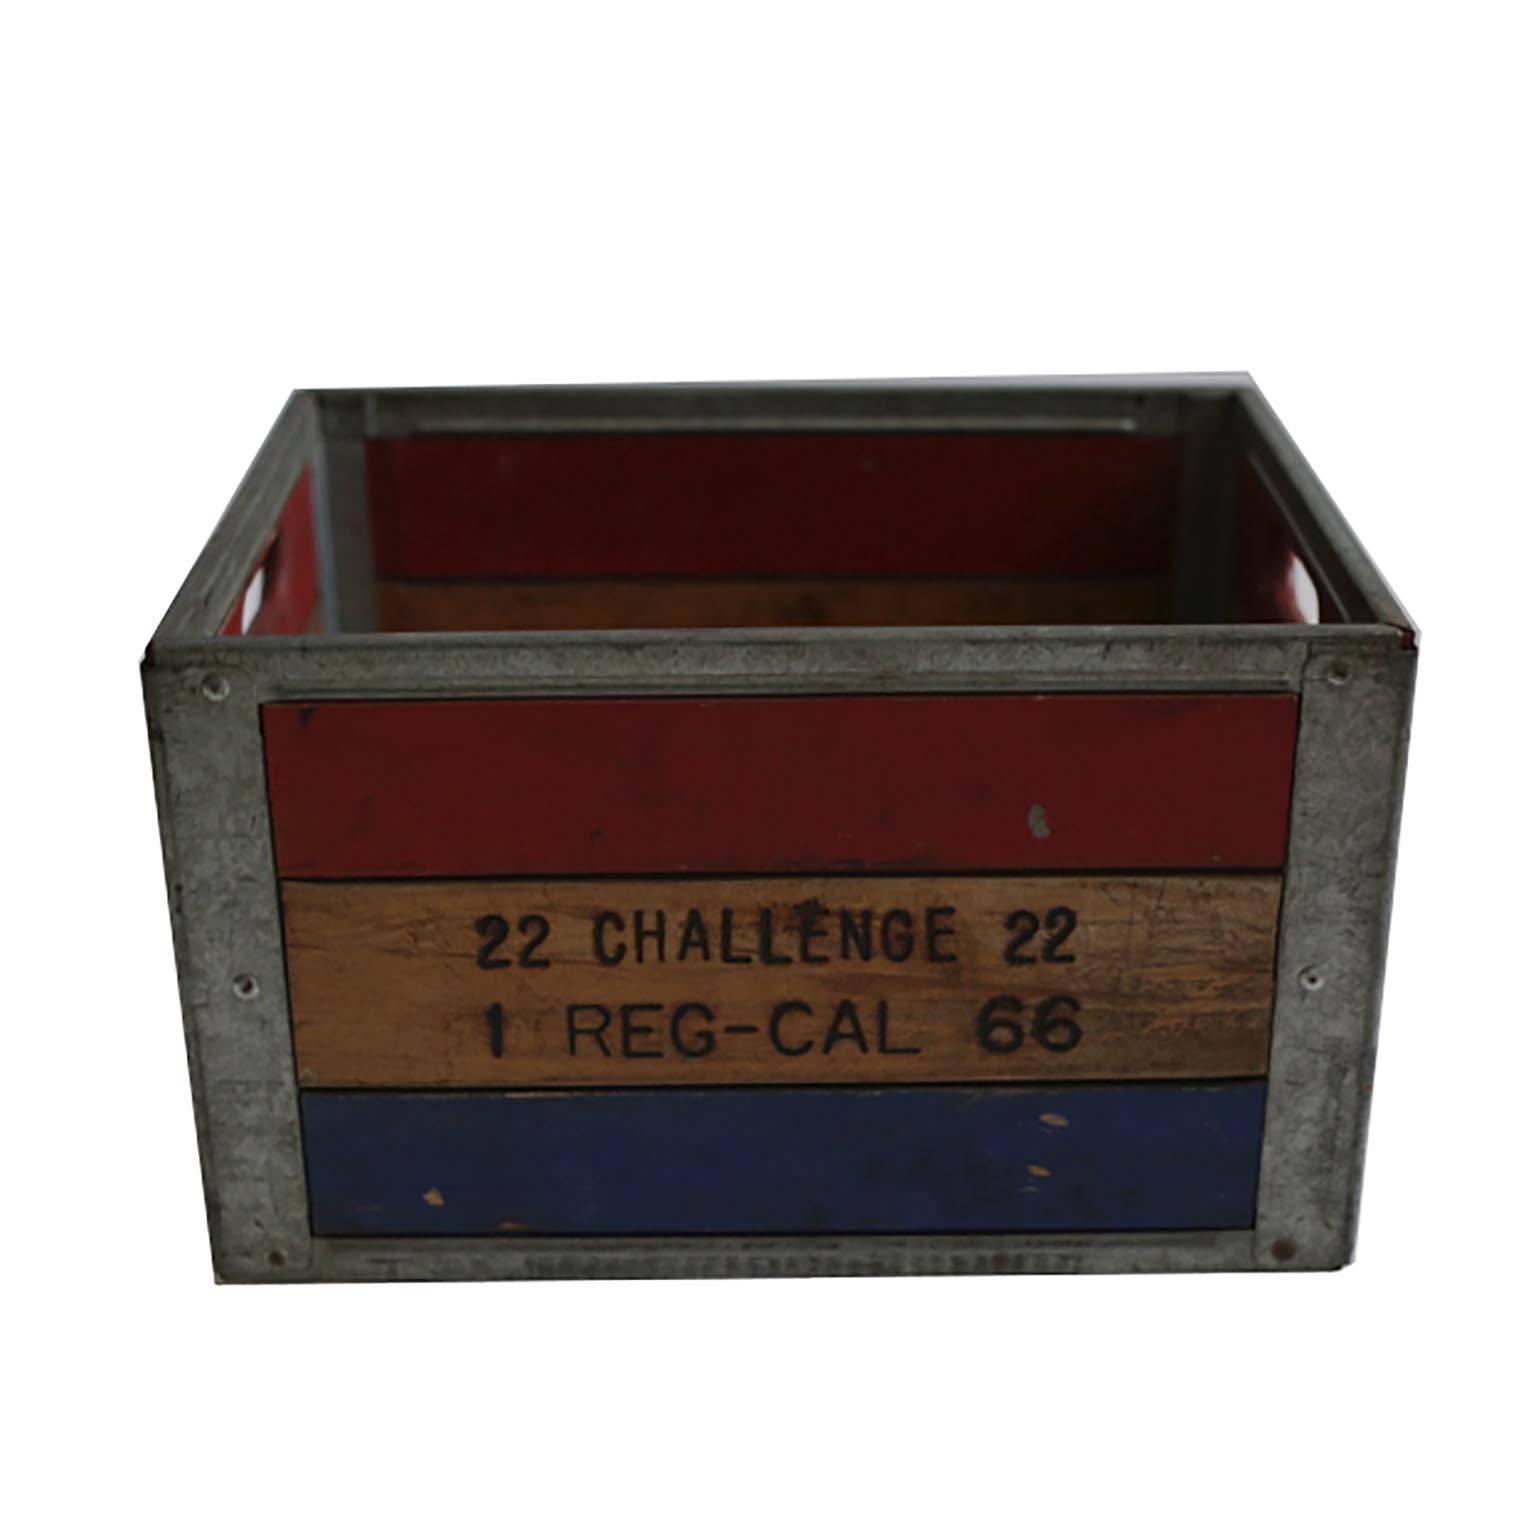 Very sturdy painted wood and steel milk crate.